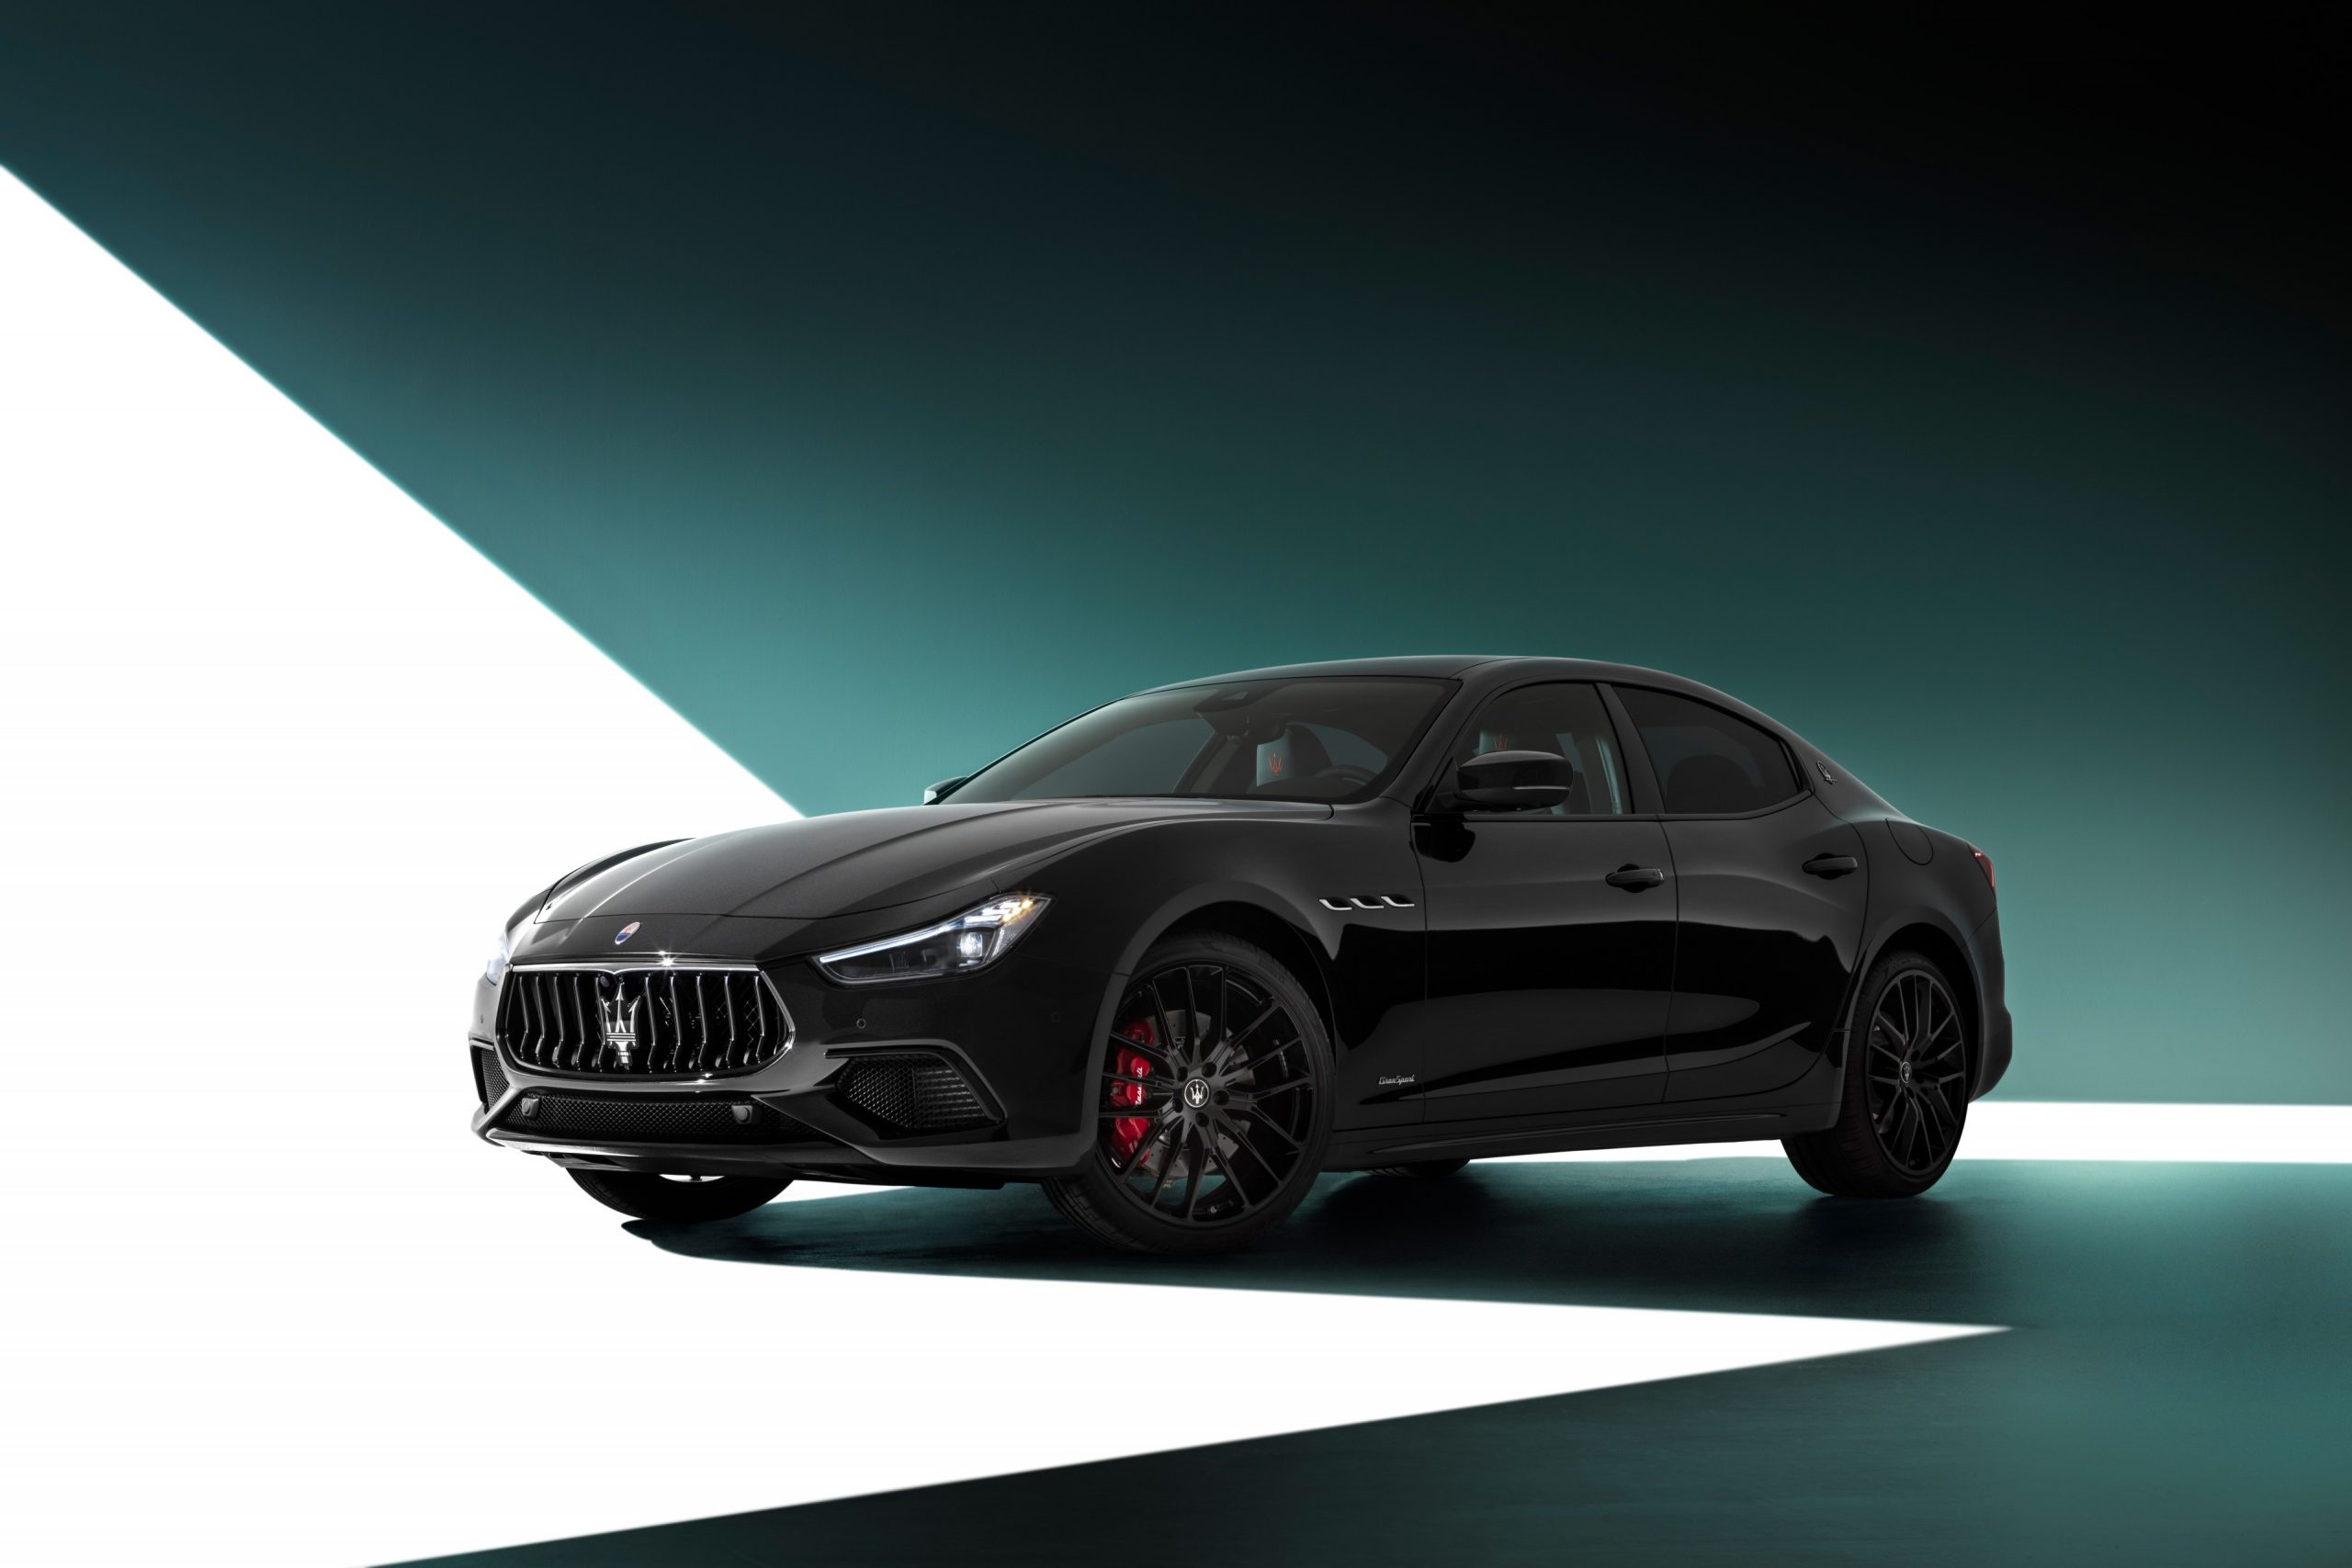 A 3/4 front view of a black Maserati Ghibli sedan with a white and green studio background